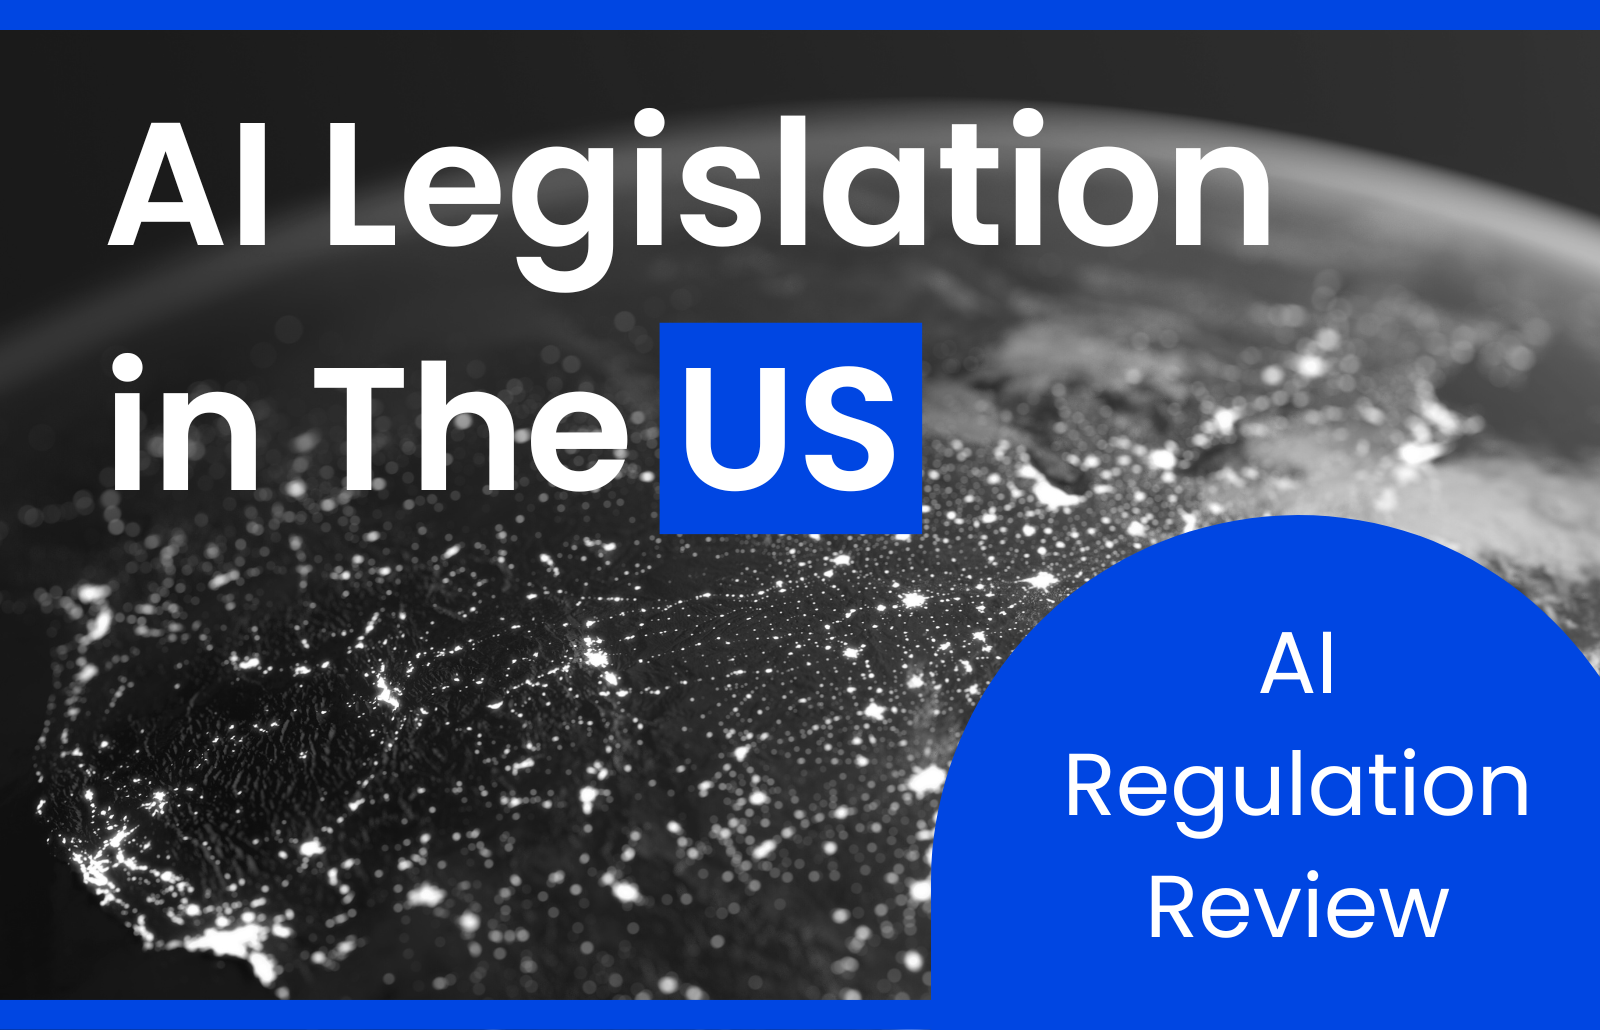 AI Regulation Review: AI Legislations in The US